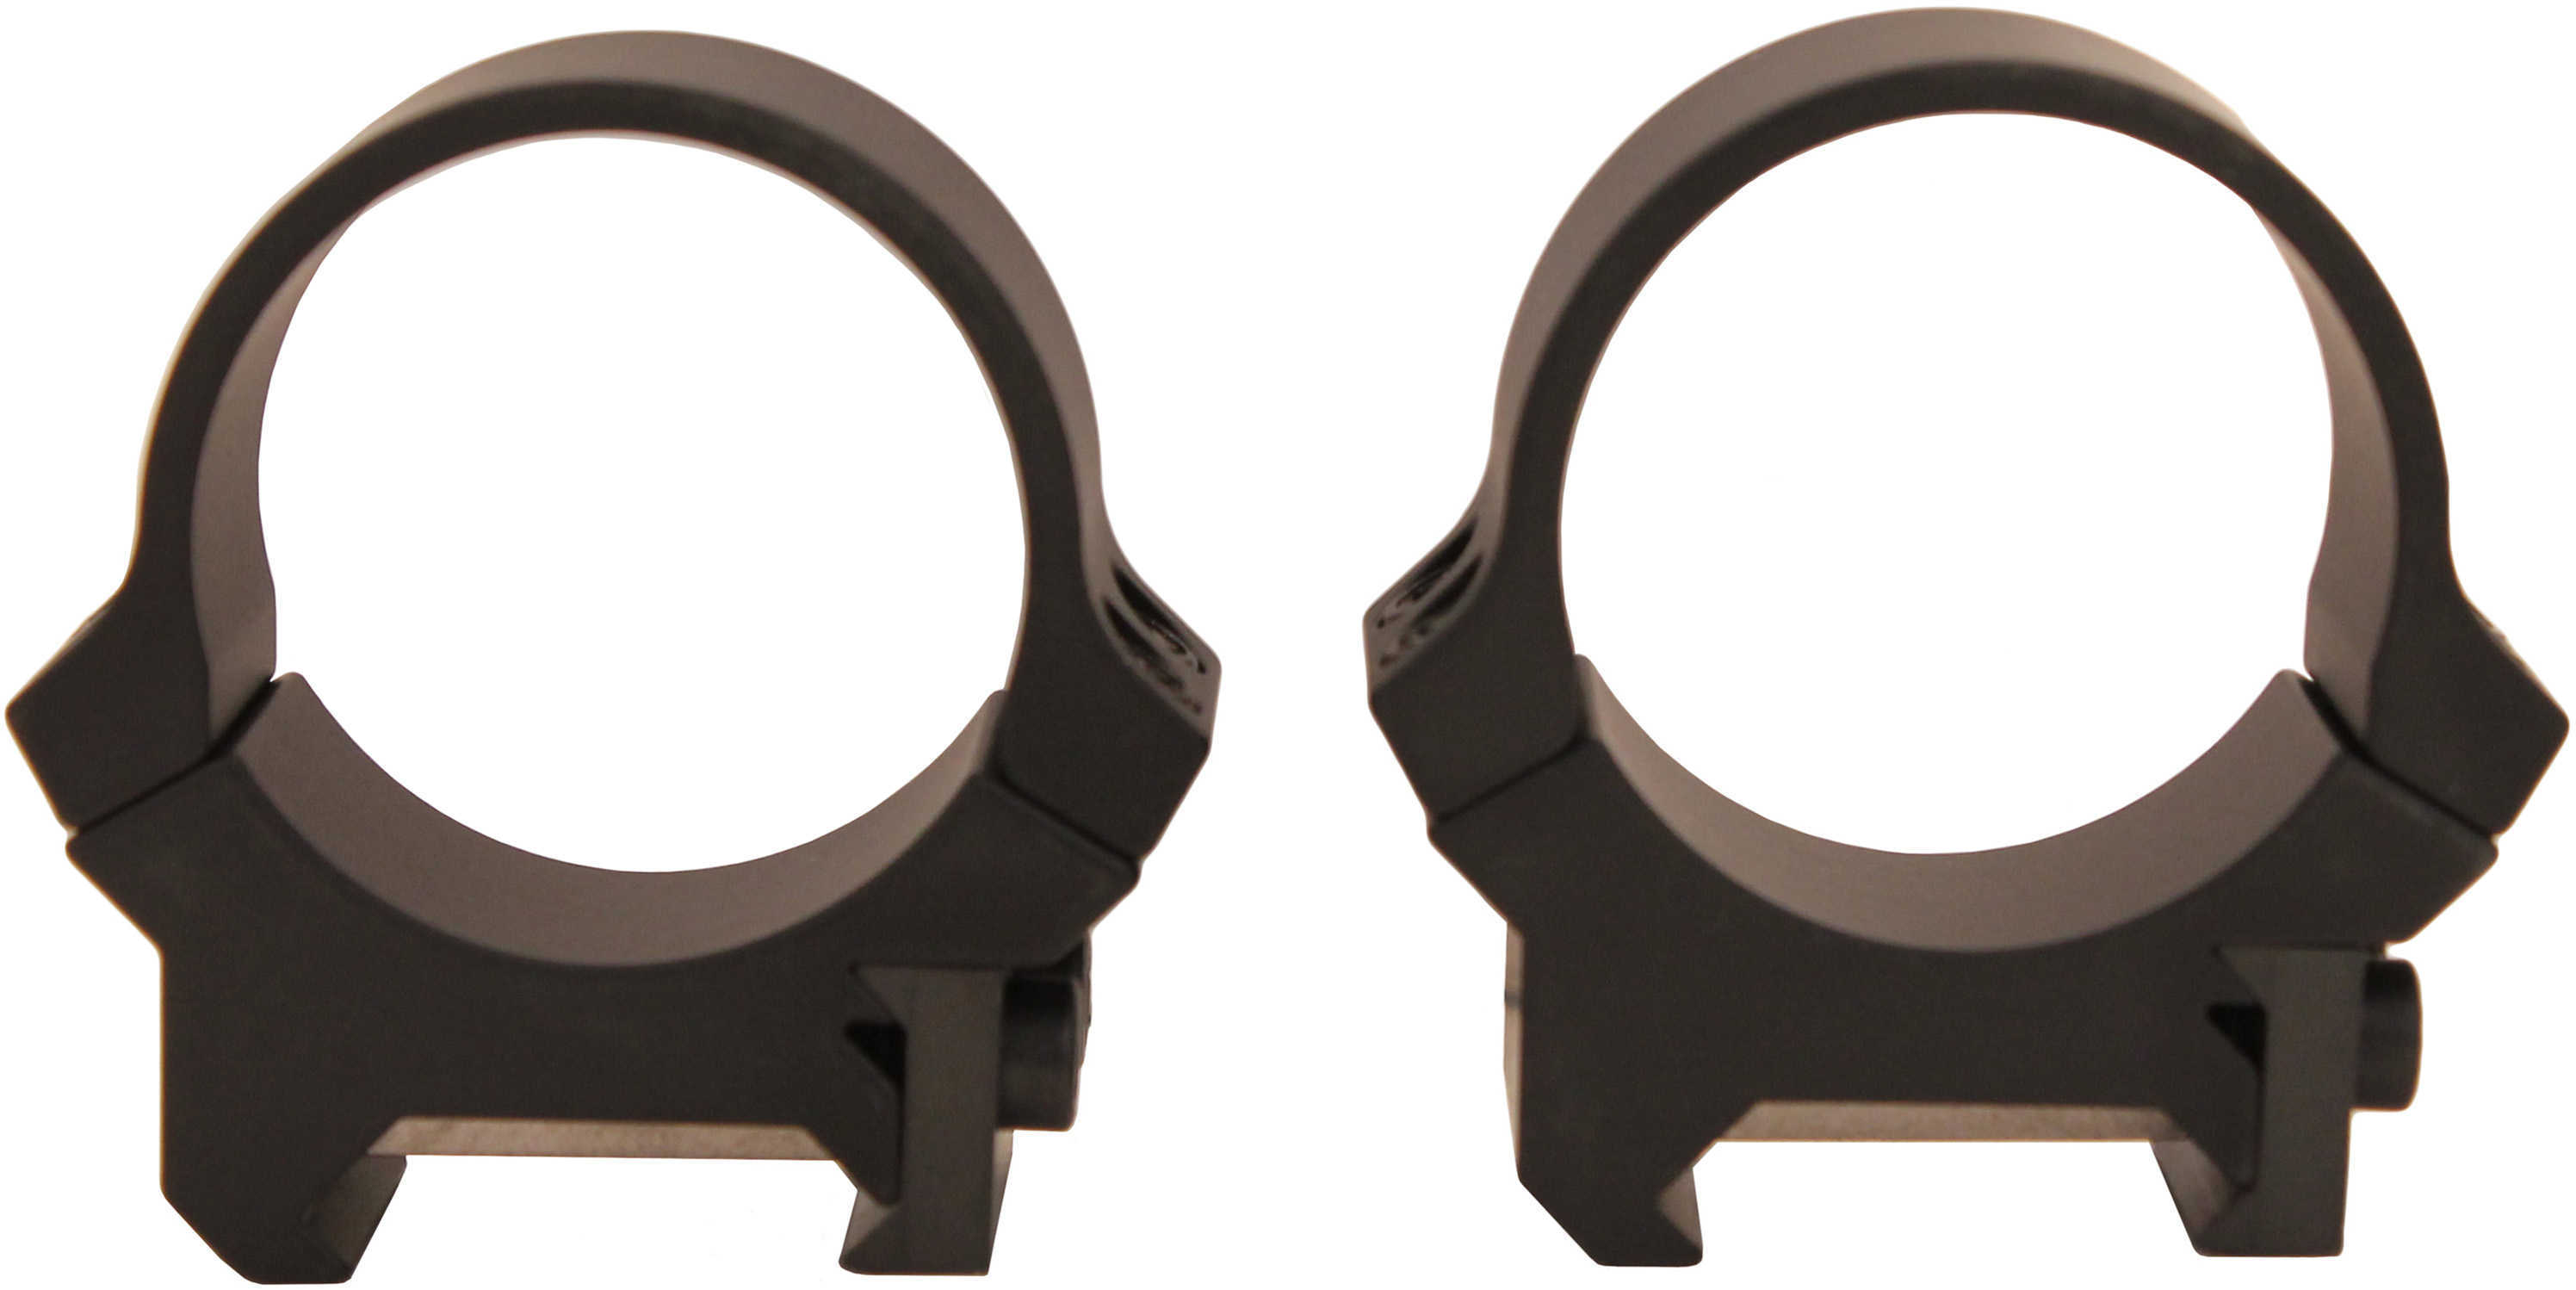 Leupold 30mm PWR Rings Low Weaver Style Matte Finish